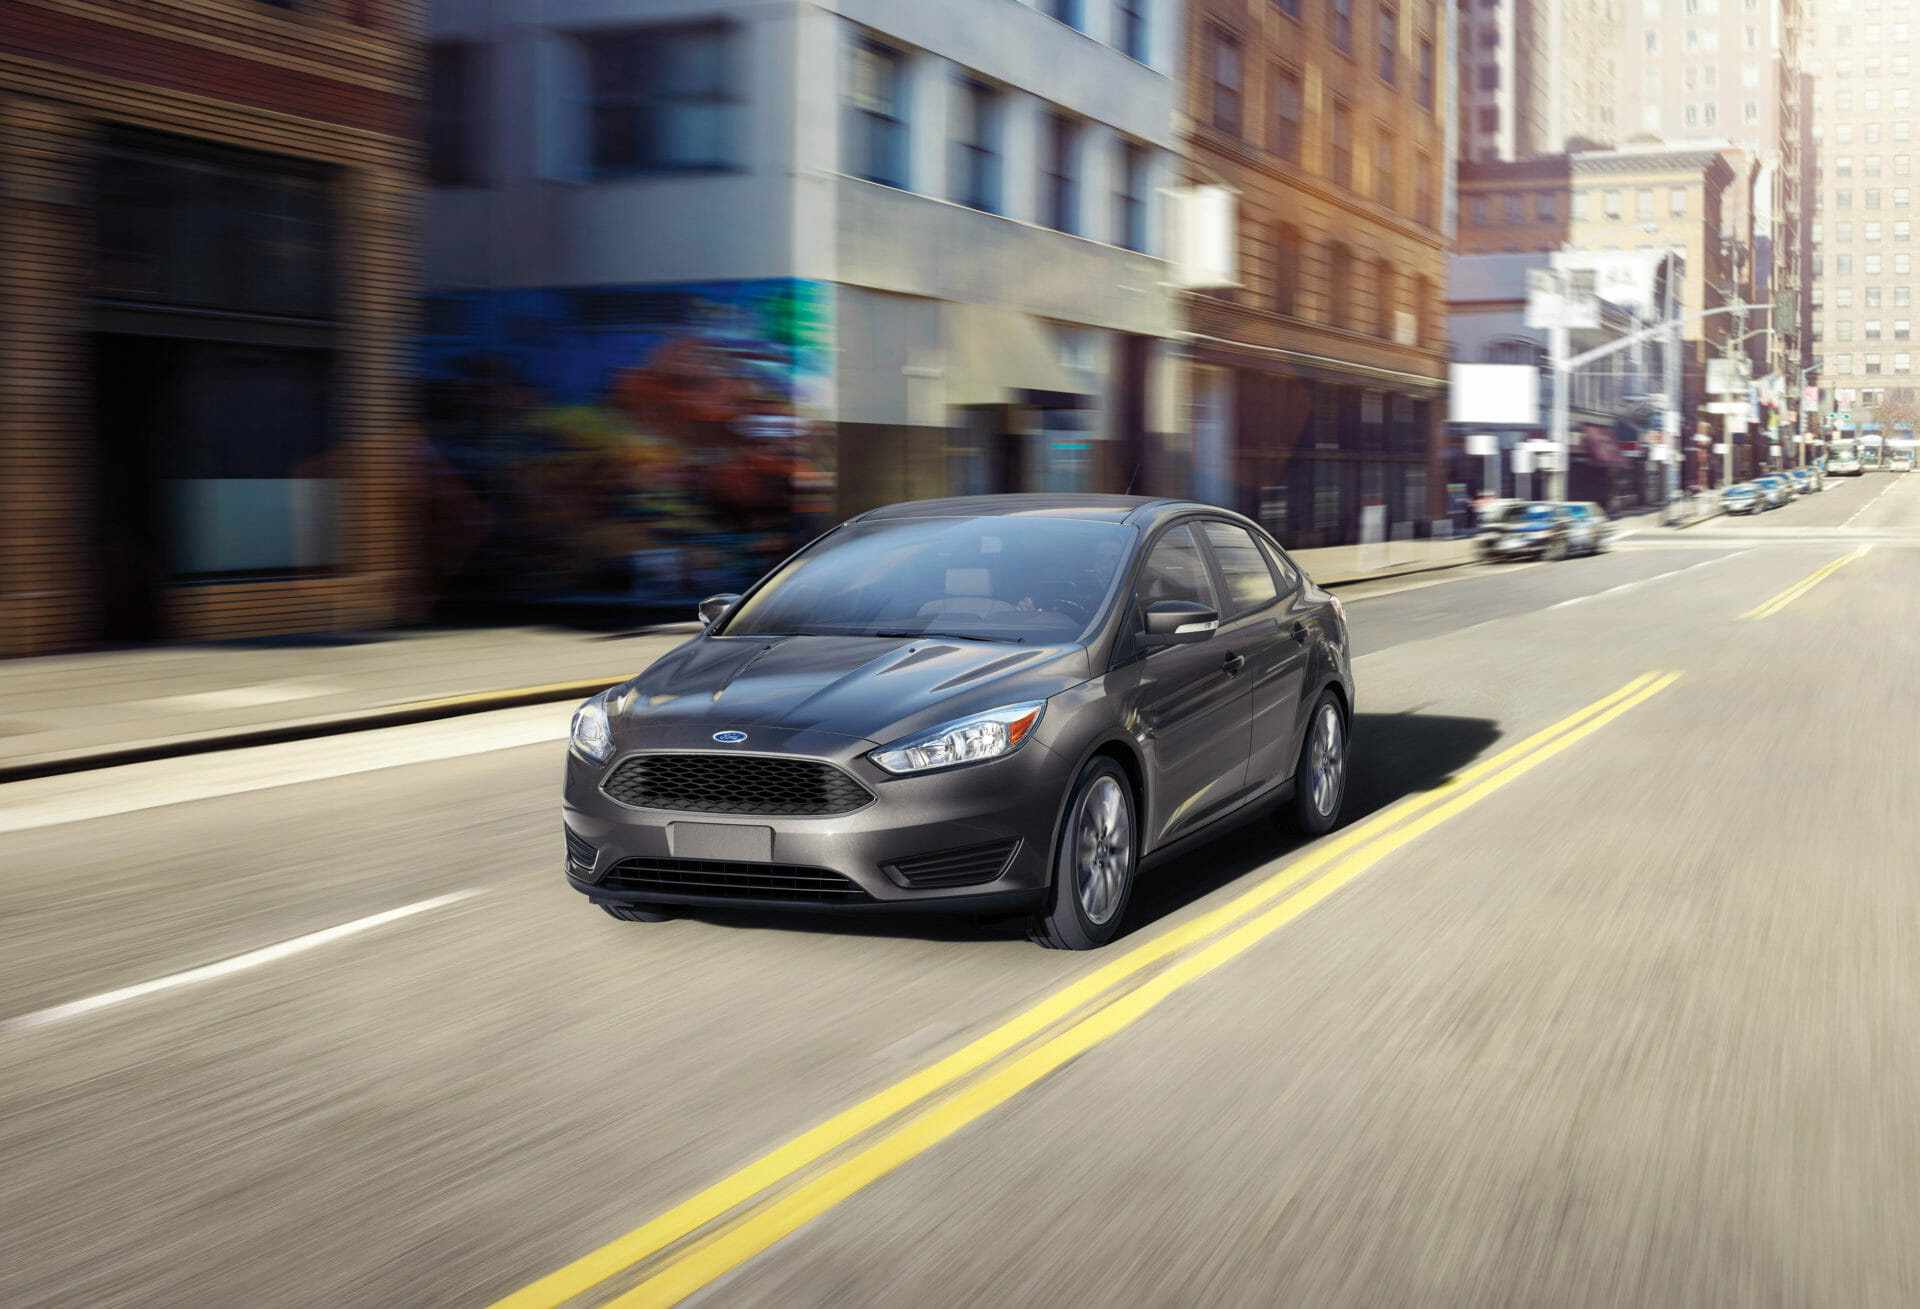 2015 Ford Focus Review: A Compact Sedan with Below-Average Reliability & Quality